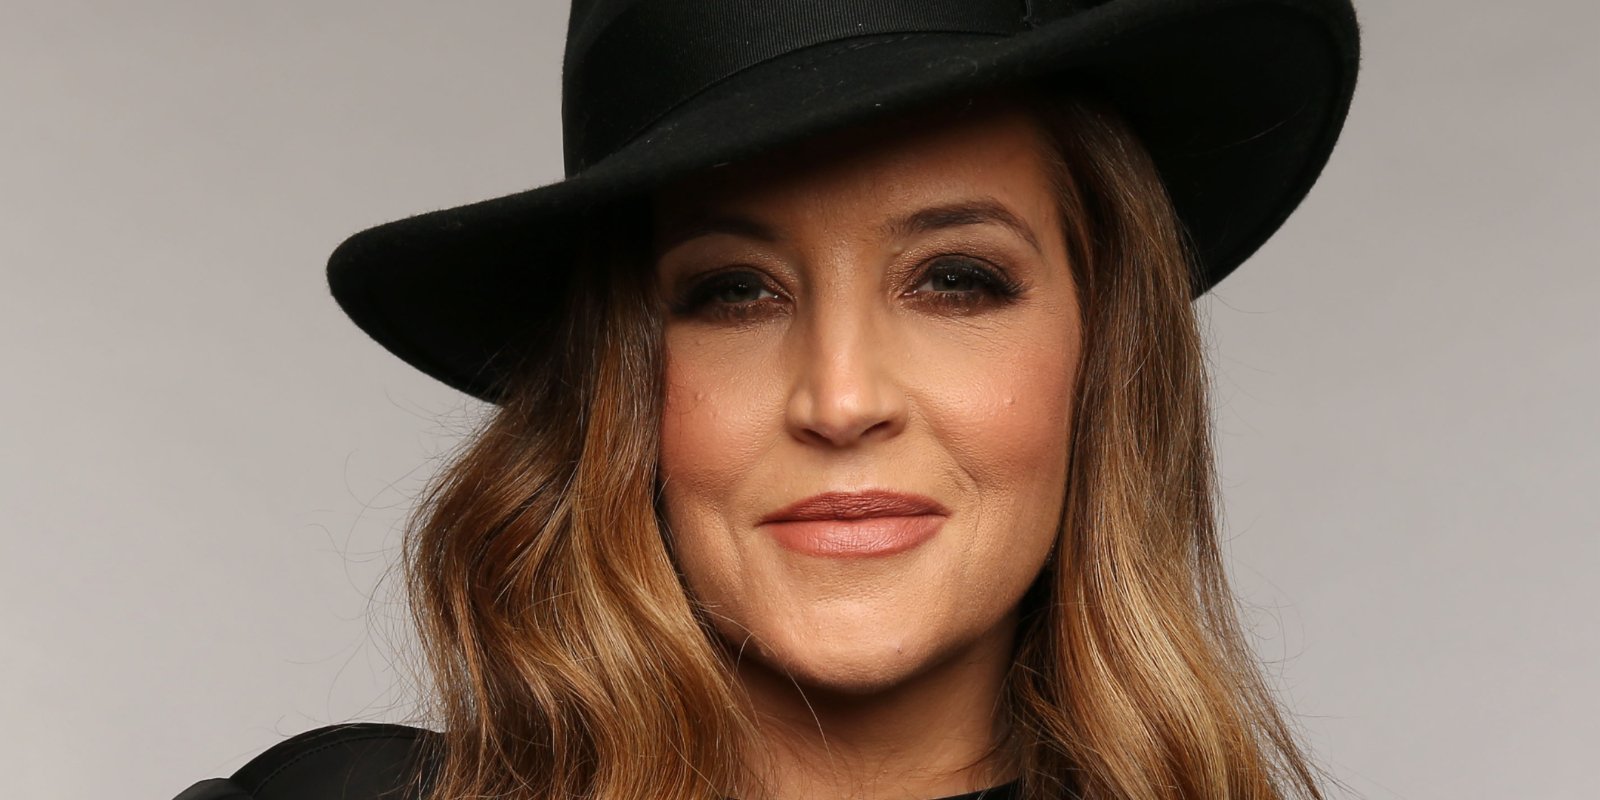 Lisa Marie Presley in a photograph taken during the 2013 CMT Music Awards at Bridgestone Arena on June 5, 2013 in Nashville, Tennessee.